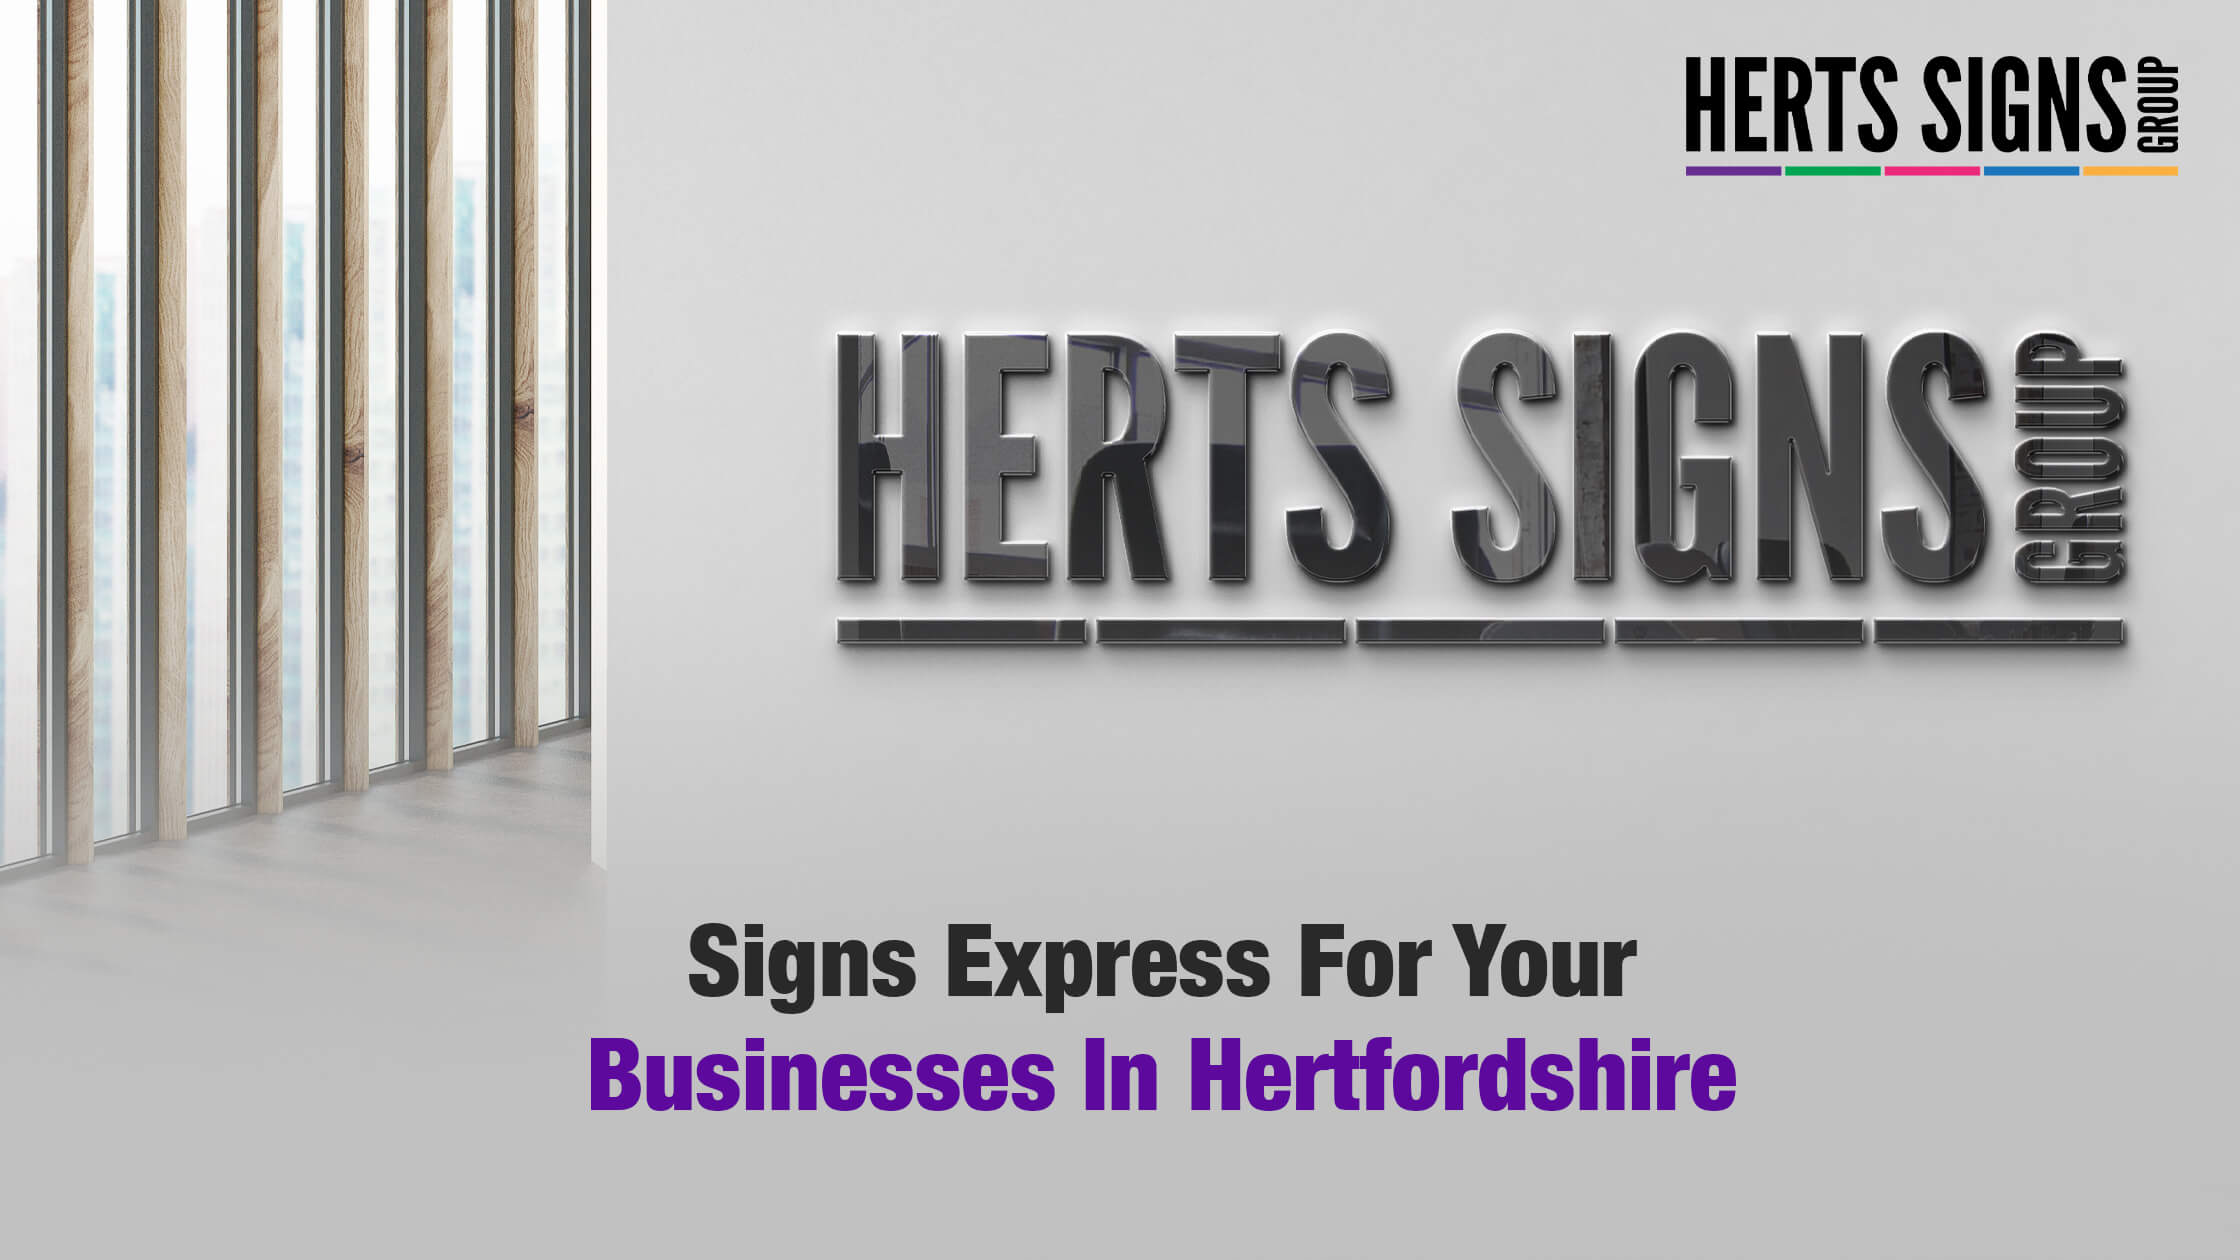 Signs Express For Your Businesses In Hertfordshire